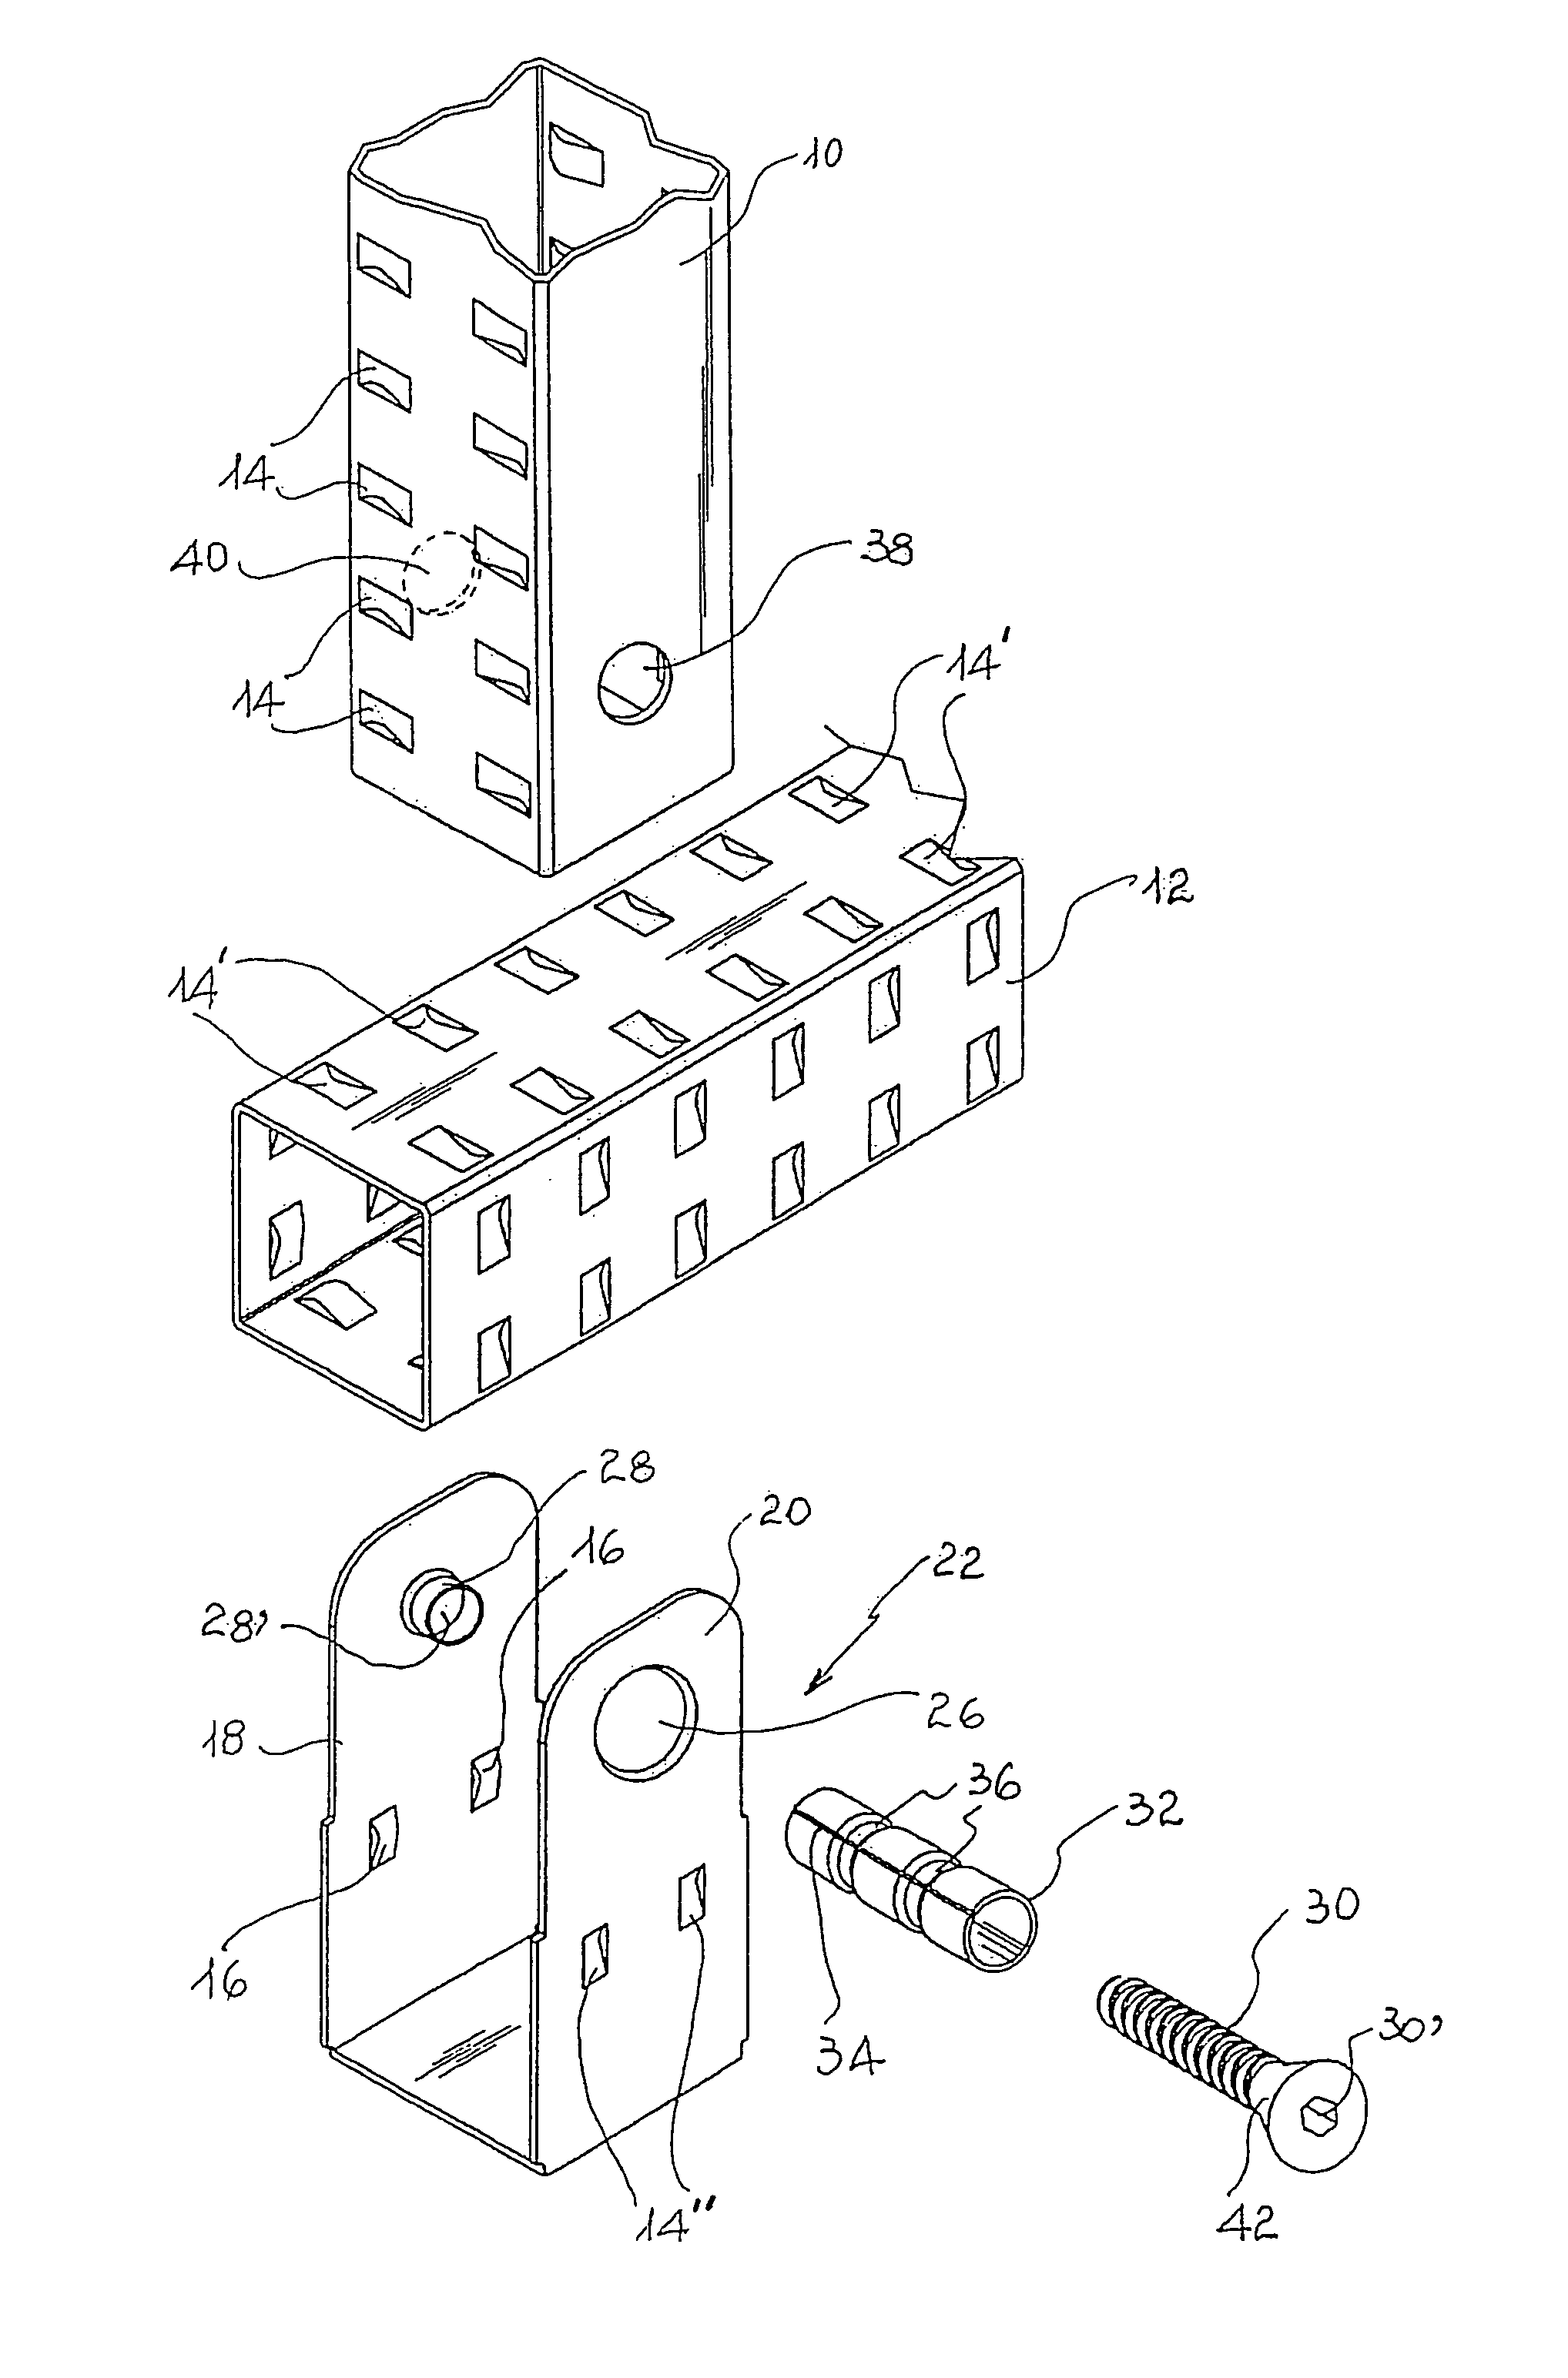 Device for the forced locking of two elements oriented orthogonally to one another